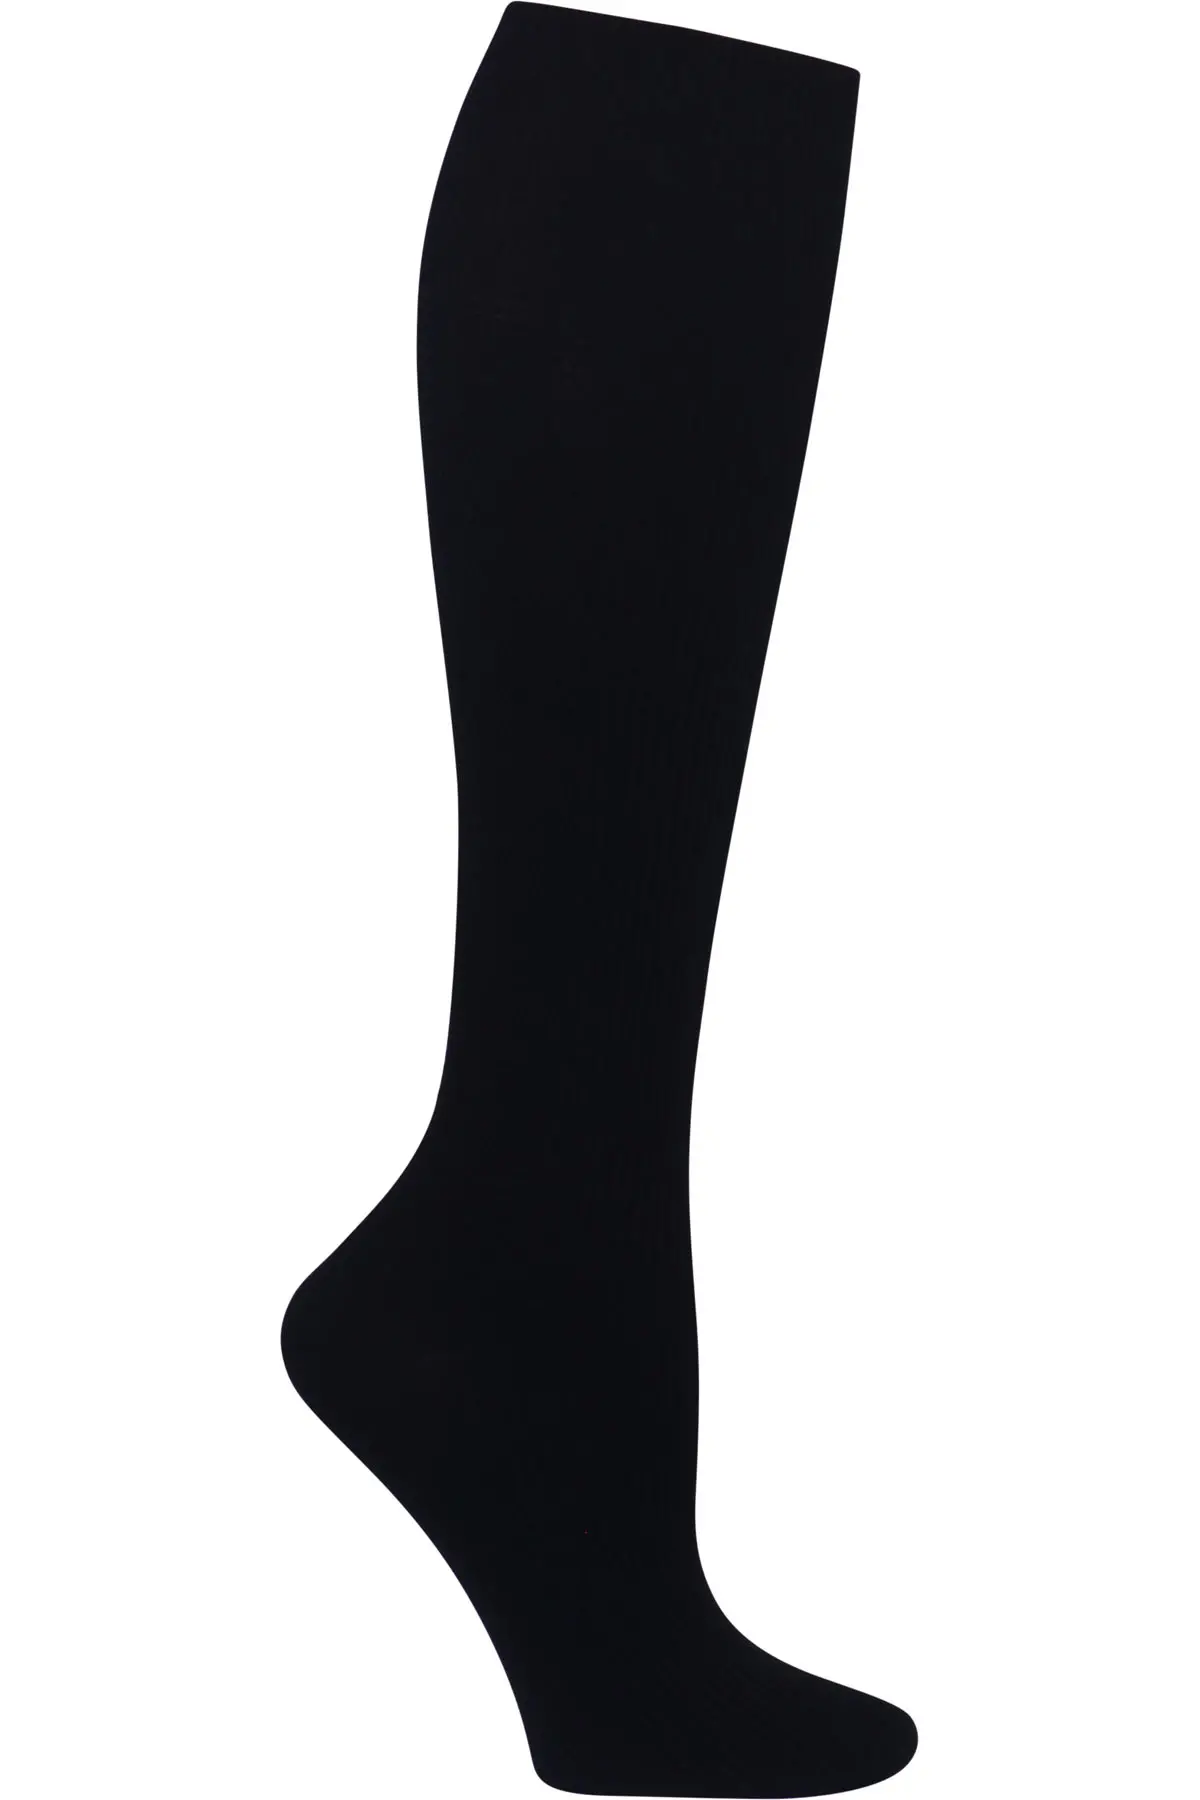 Rose Manor Compression Socks  Accessories, Hosiery :Beautiful Designs by  April Cornell